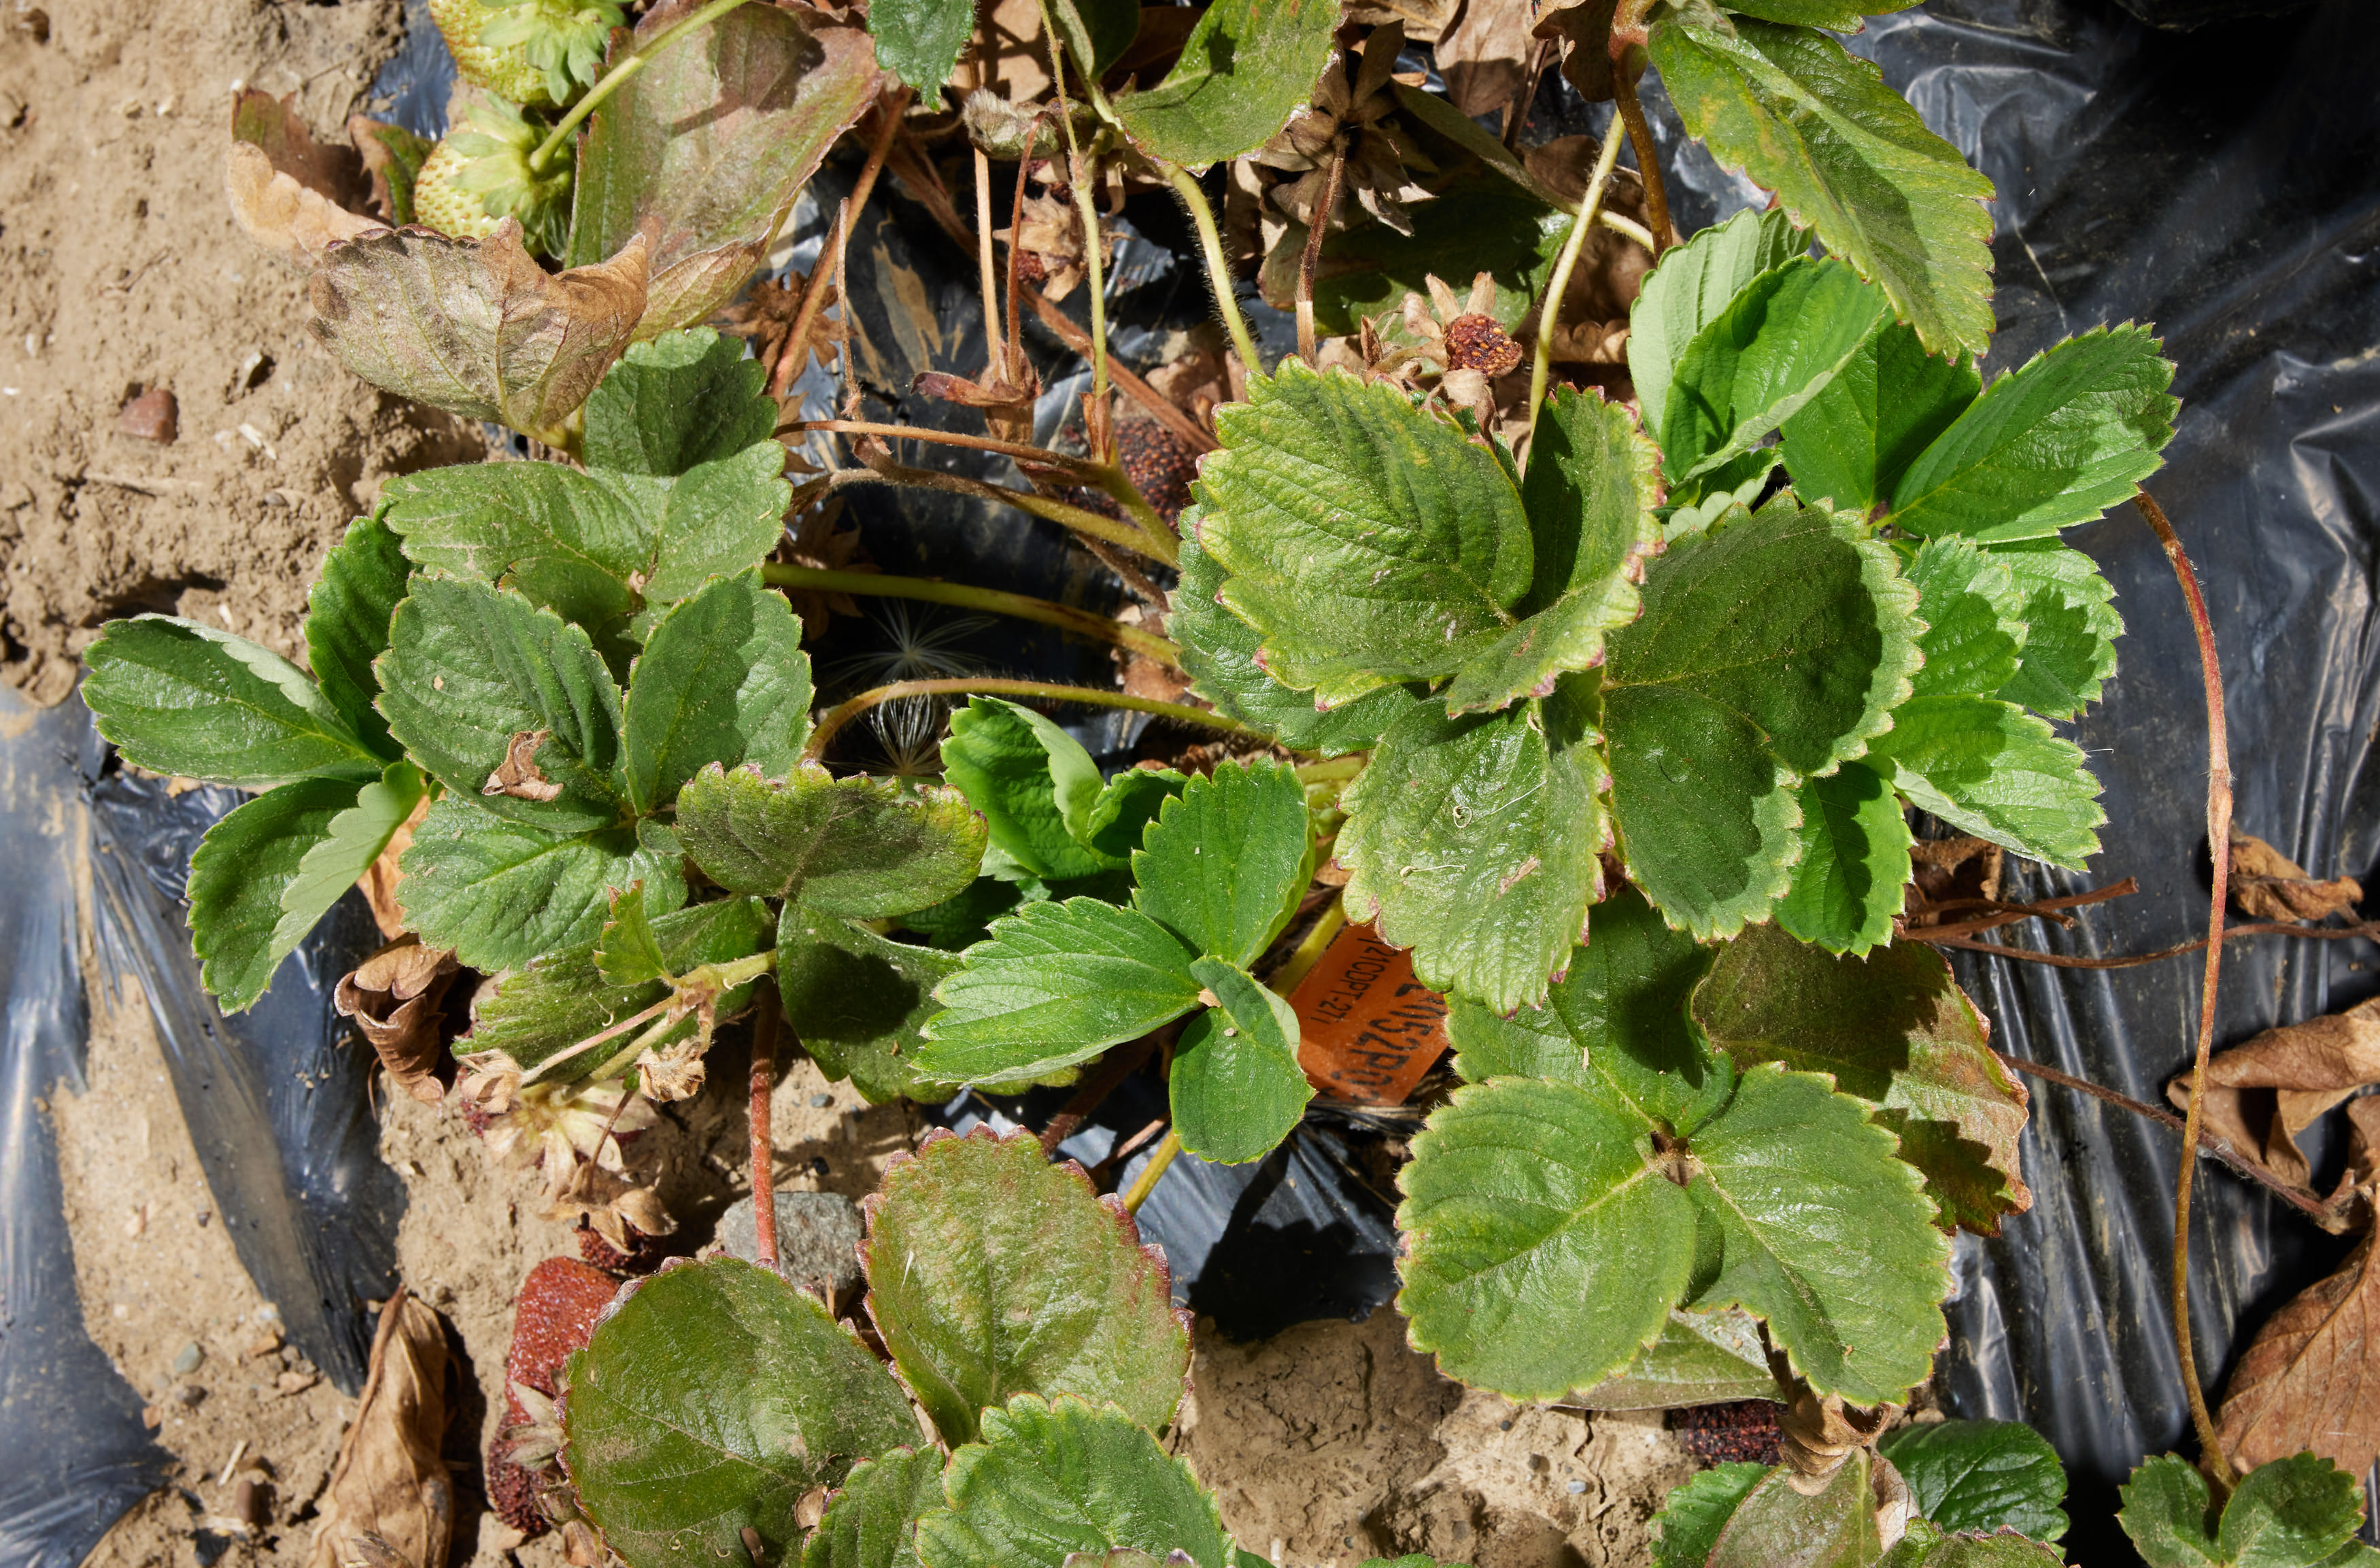 Strawberry plants affected by Fusarium wilt taken at the Armstrong Pathology Farm. Photos by Fred Greaves for UC Davis